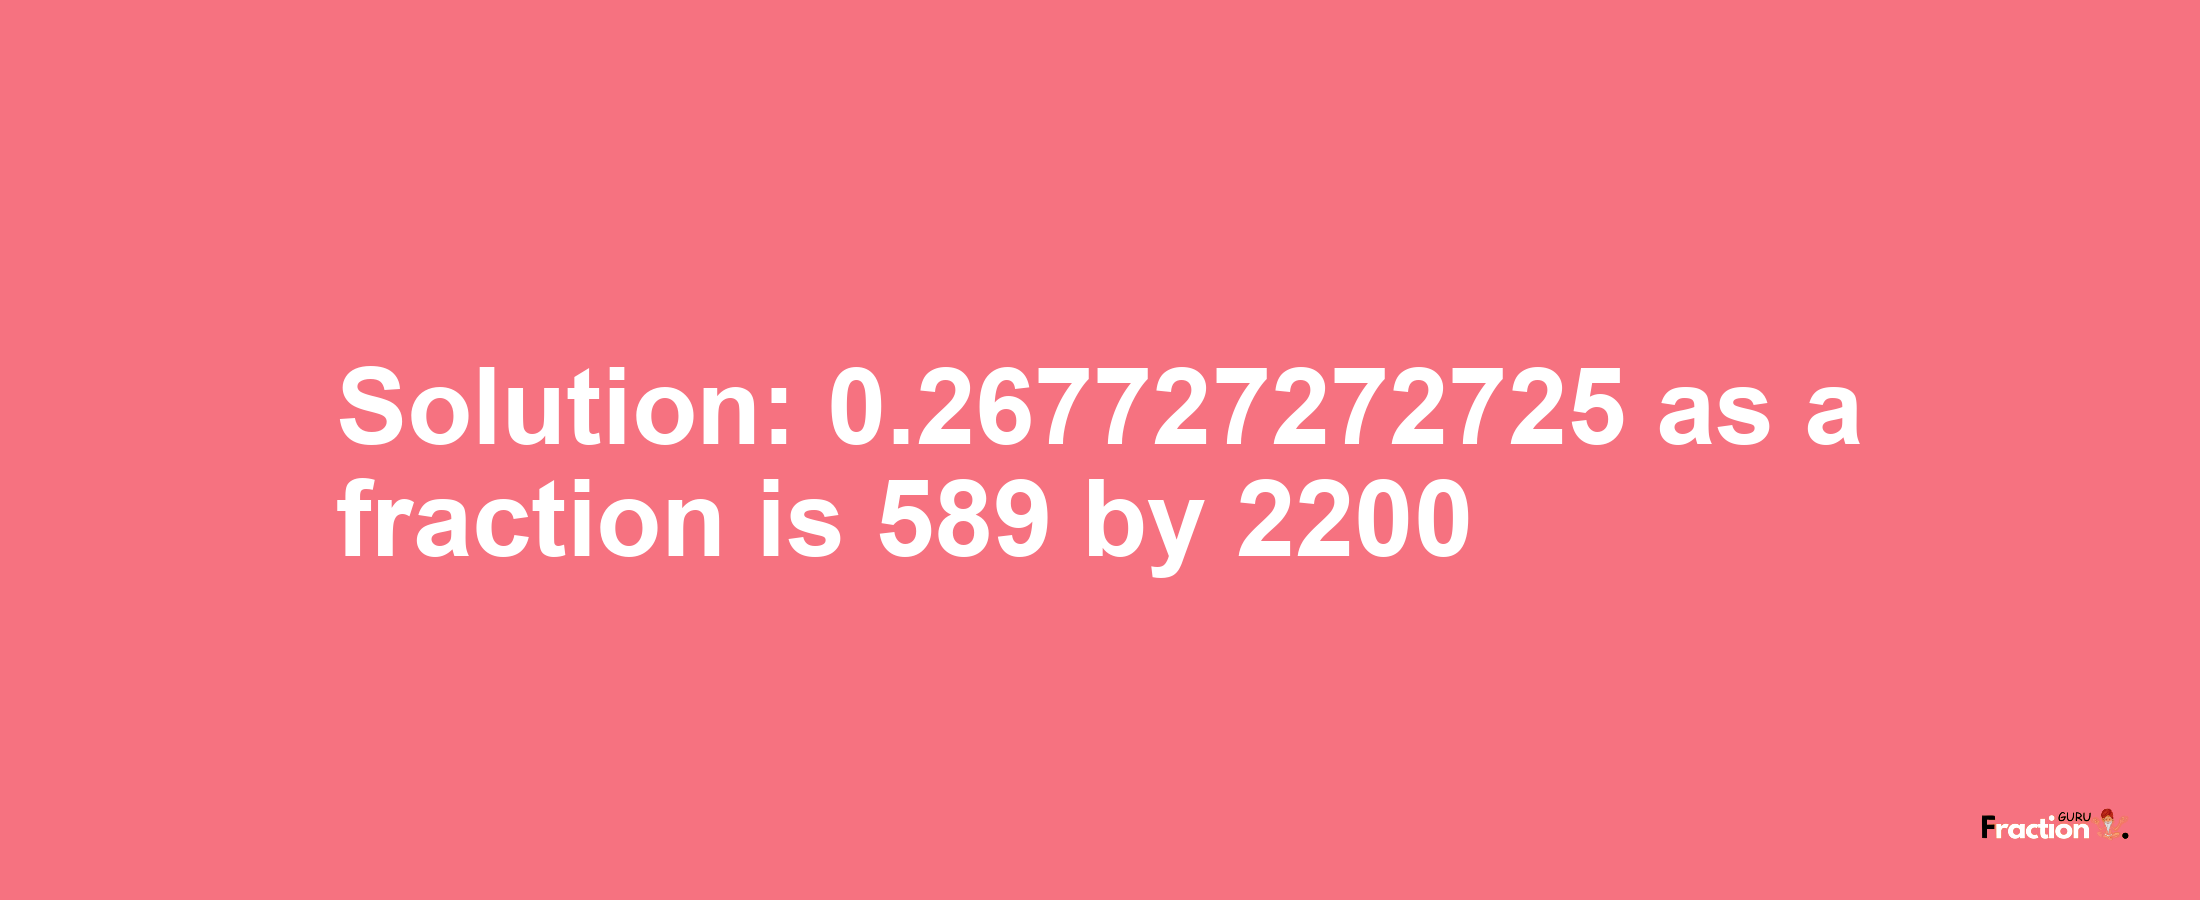 Solution:0.267727272725 as a fraction is 589/2200